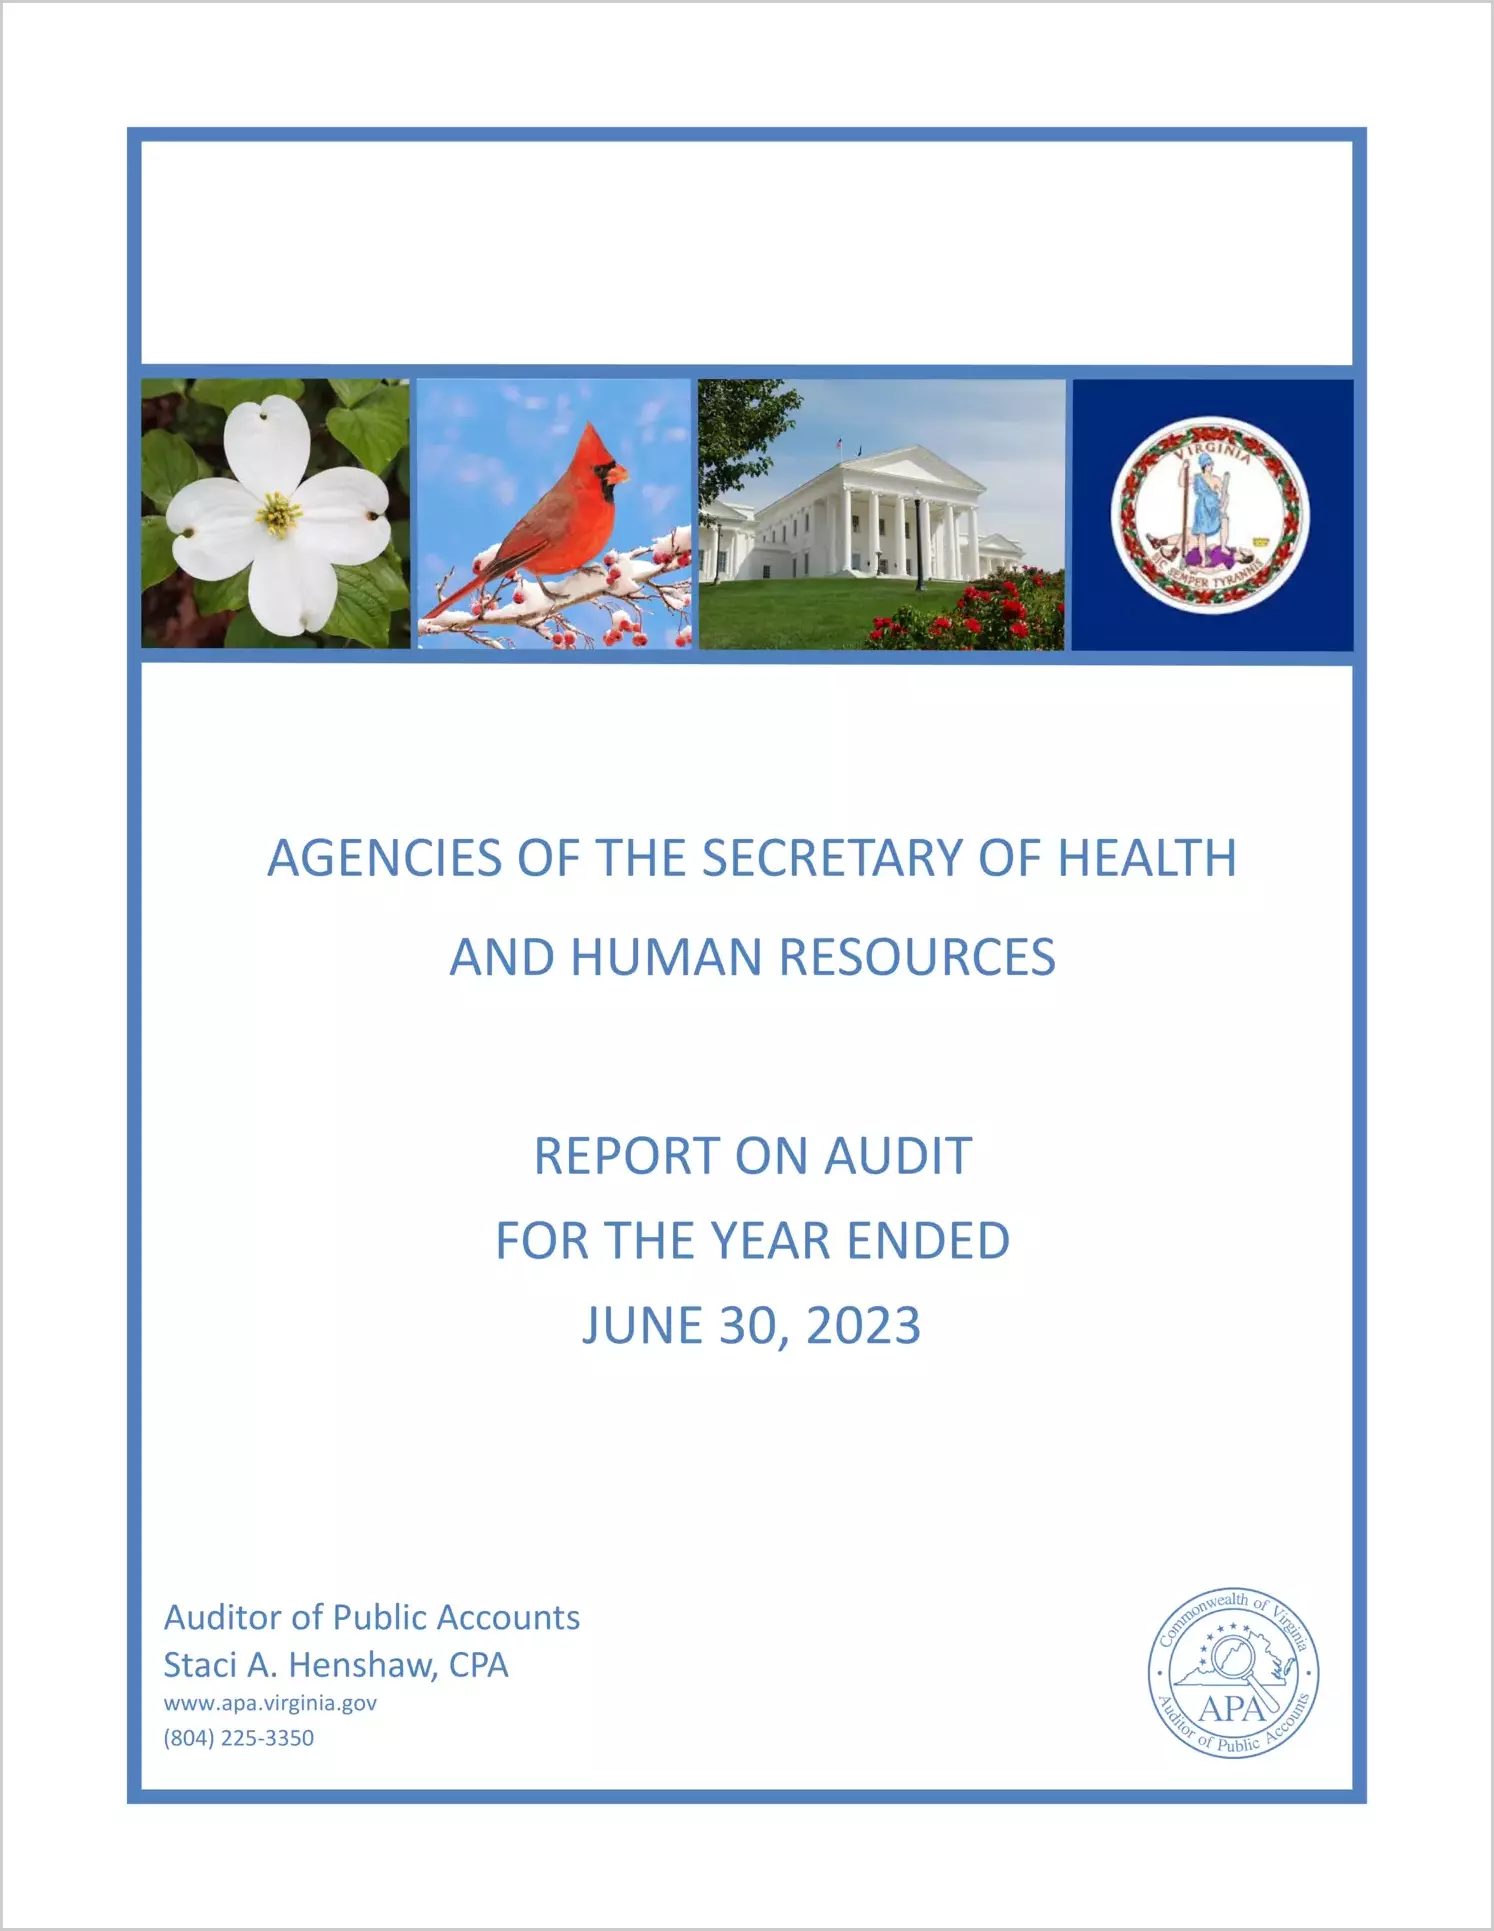 Agencies of the Secretary of Health and Human Resources for the year ended June 30, 2023